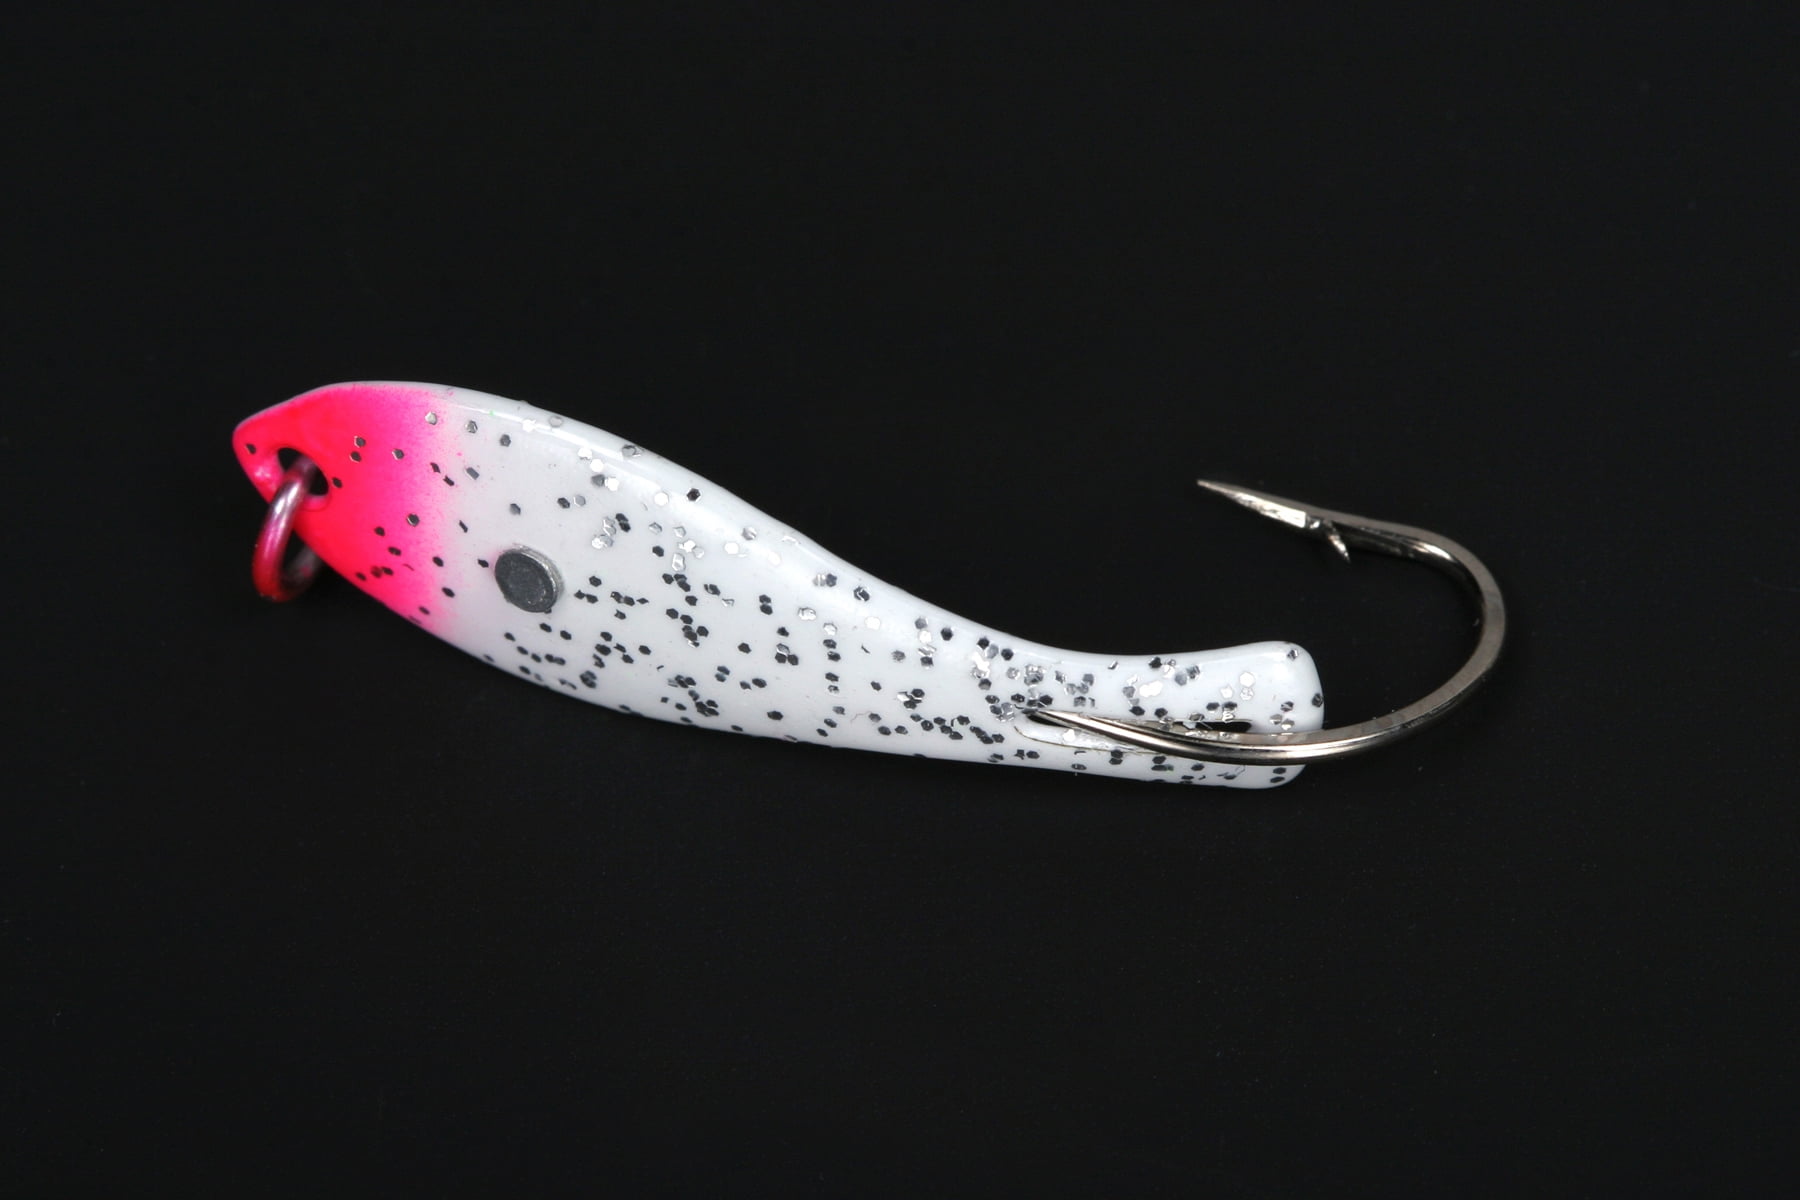 Nungesser Saltwater Shad Spoon Fishing Lure, Hot Pink & White, 1 1